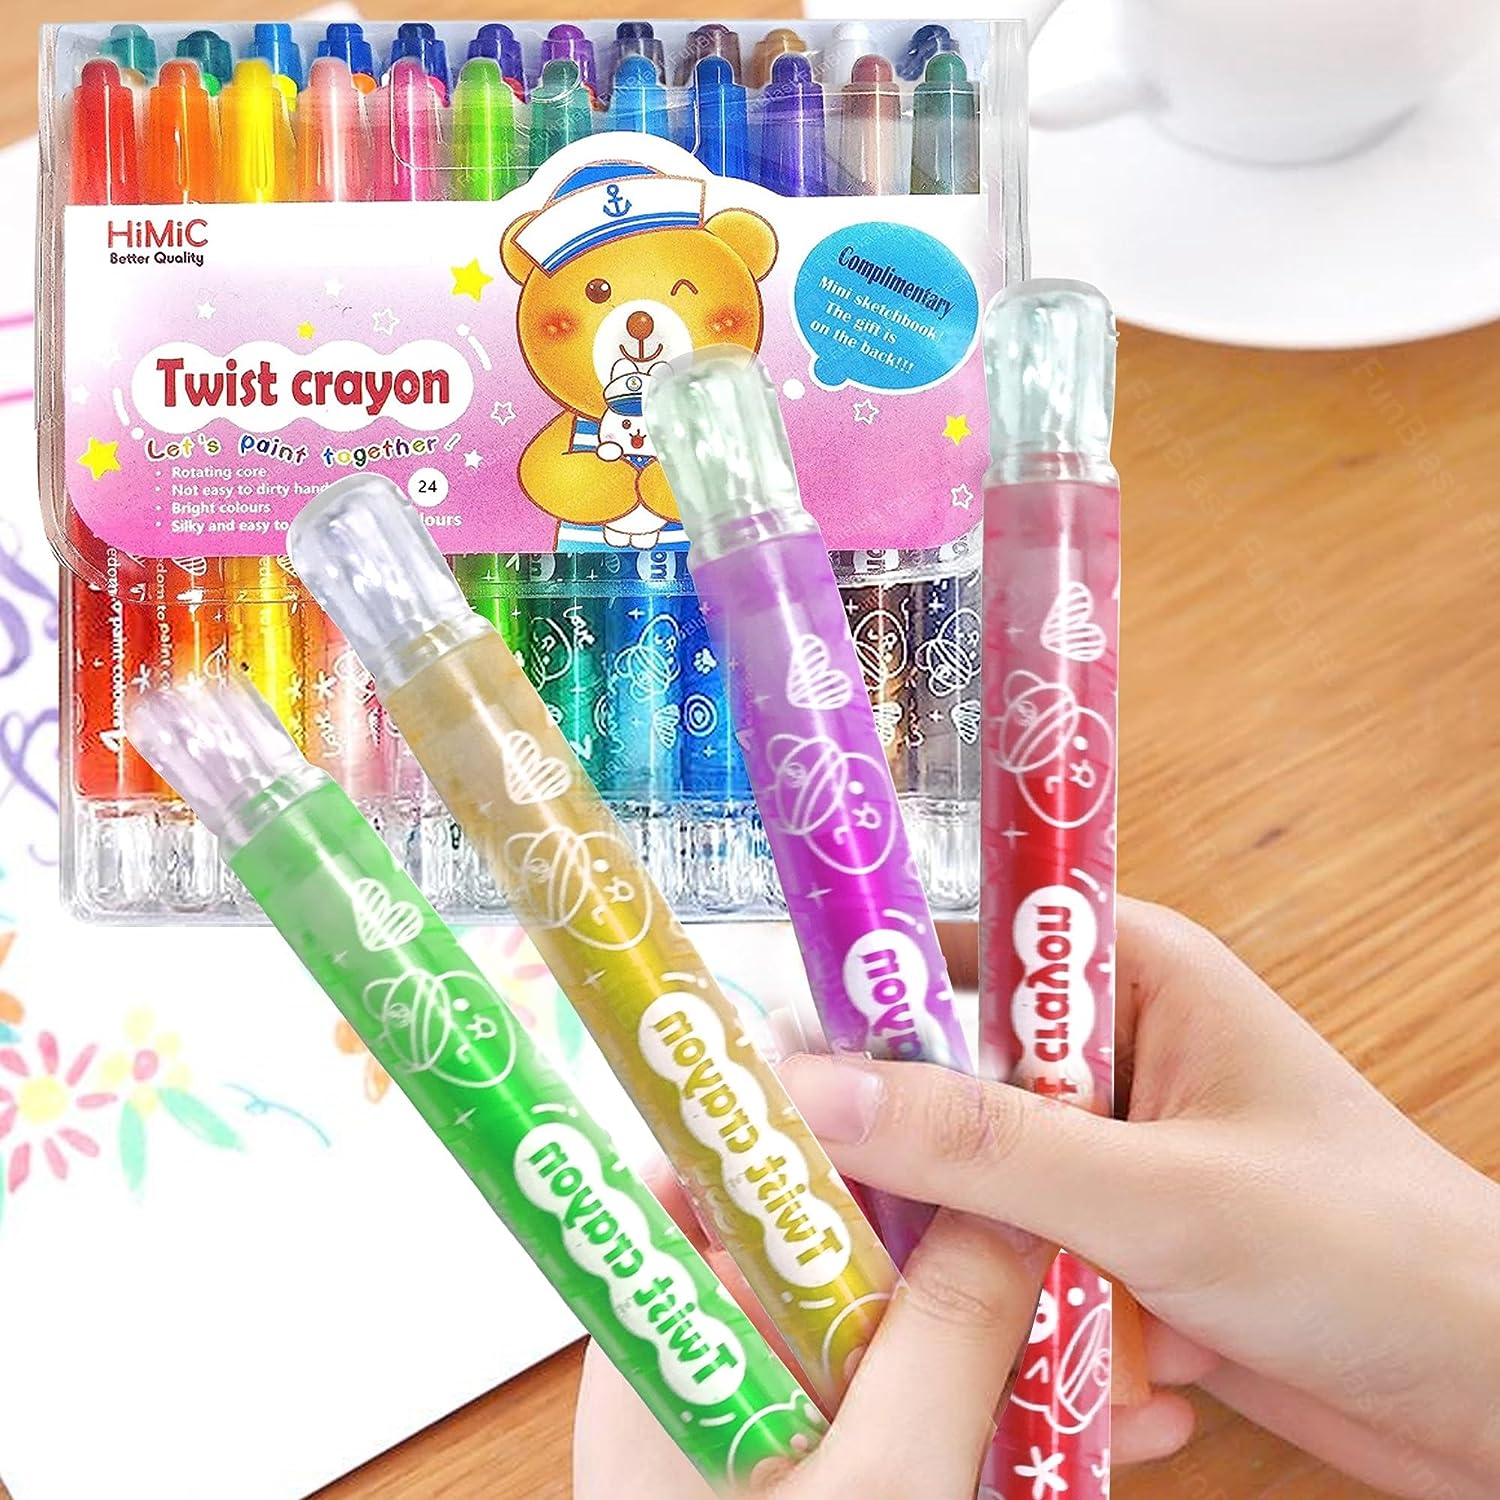 Twist Crayons For Kids - 24 Pcs Crayon Set For Kids, Coloring Kit For Kids, Crayon For Drawing And Painting For Kids, Art And Craft Kit (24 Pcs)